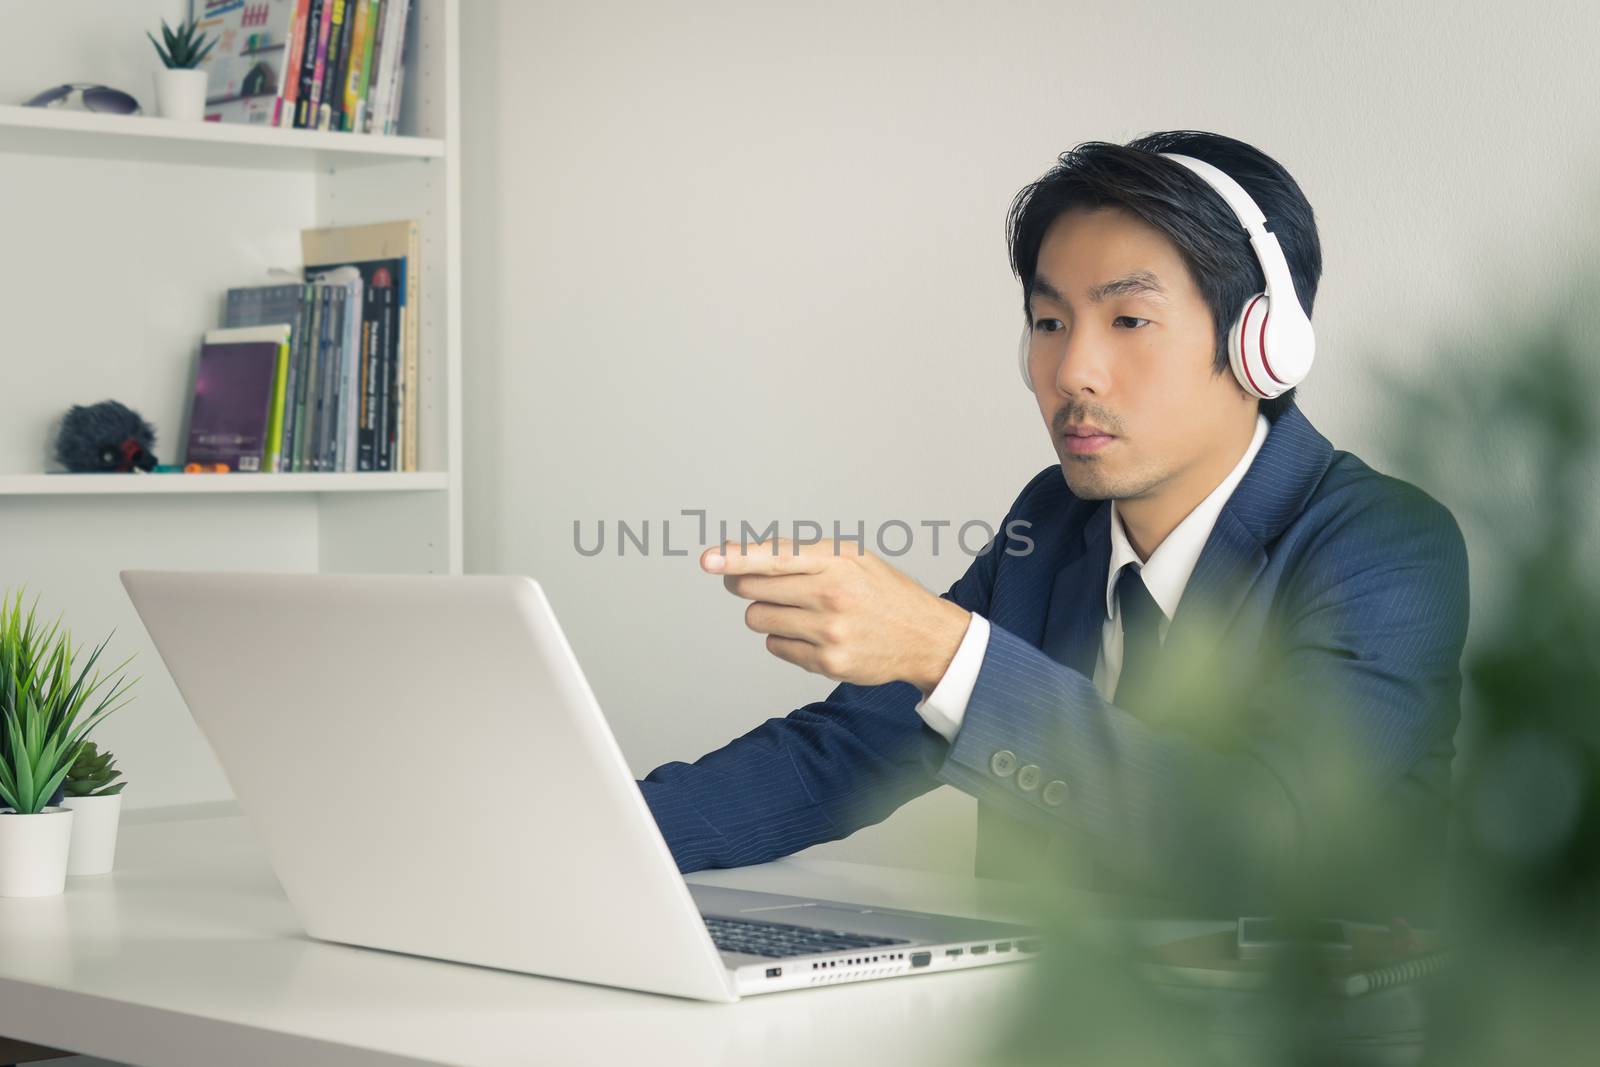 Asian Man Call Center in Suit Wear Headset Seriously Answer Customer Questions. Asian man call center working in front of laptop